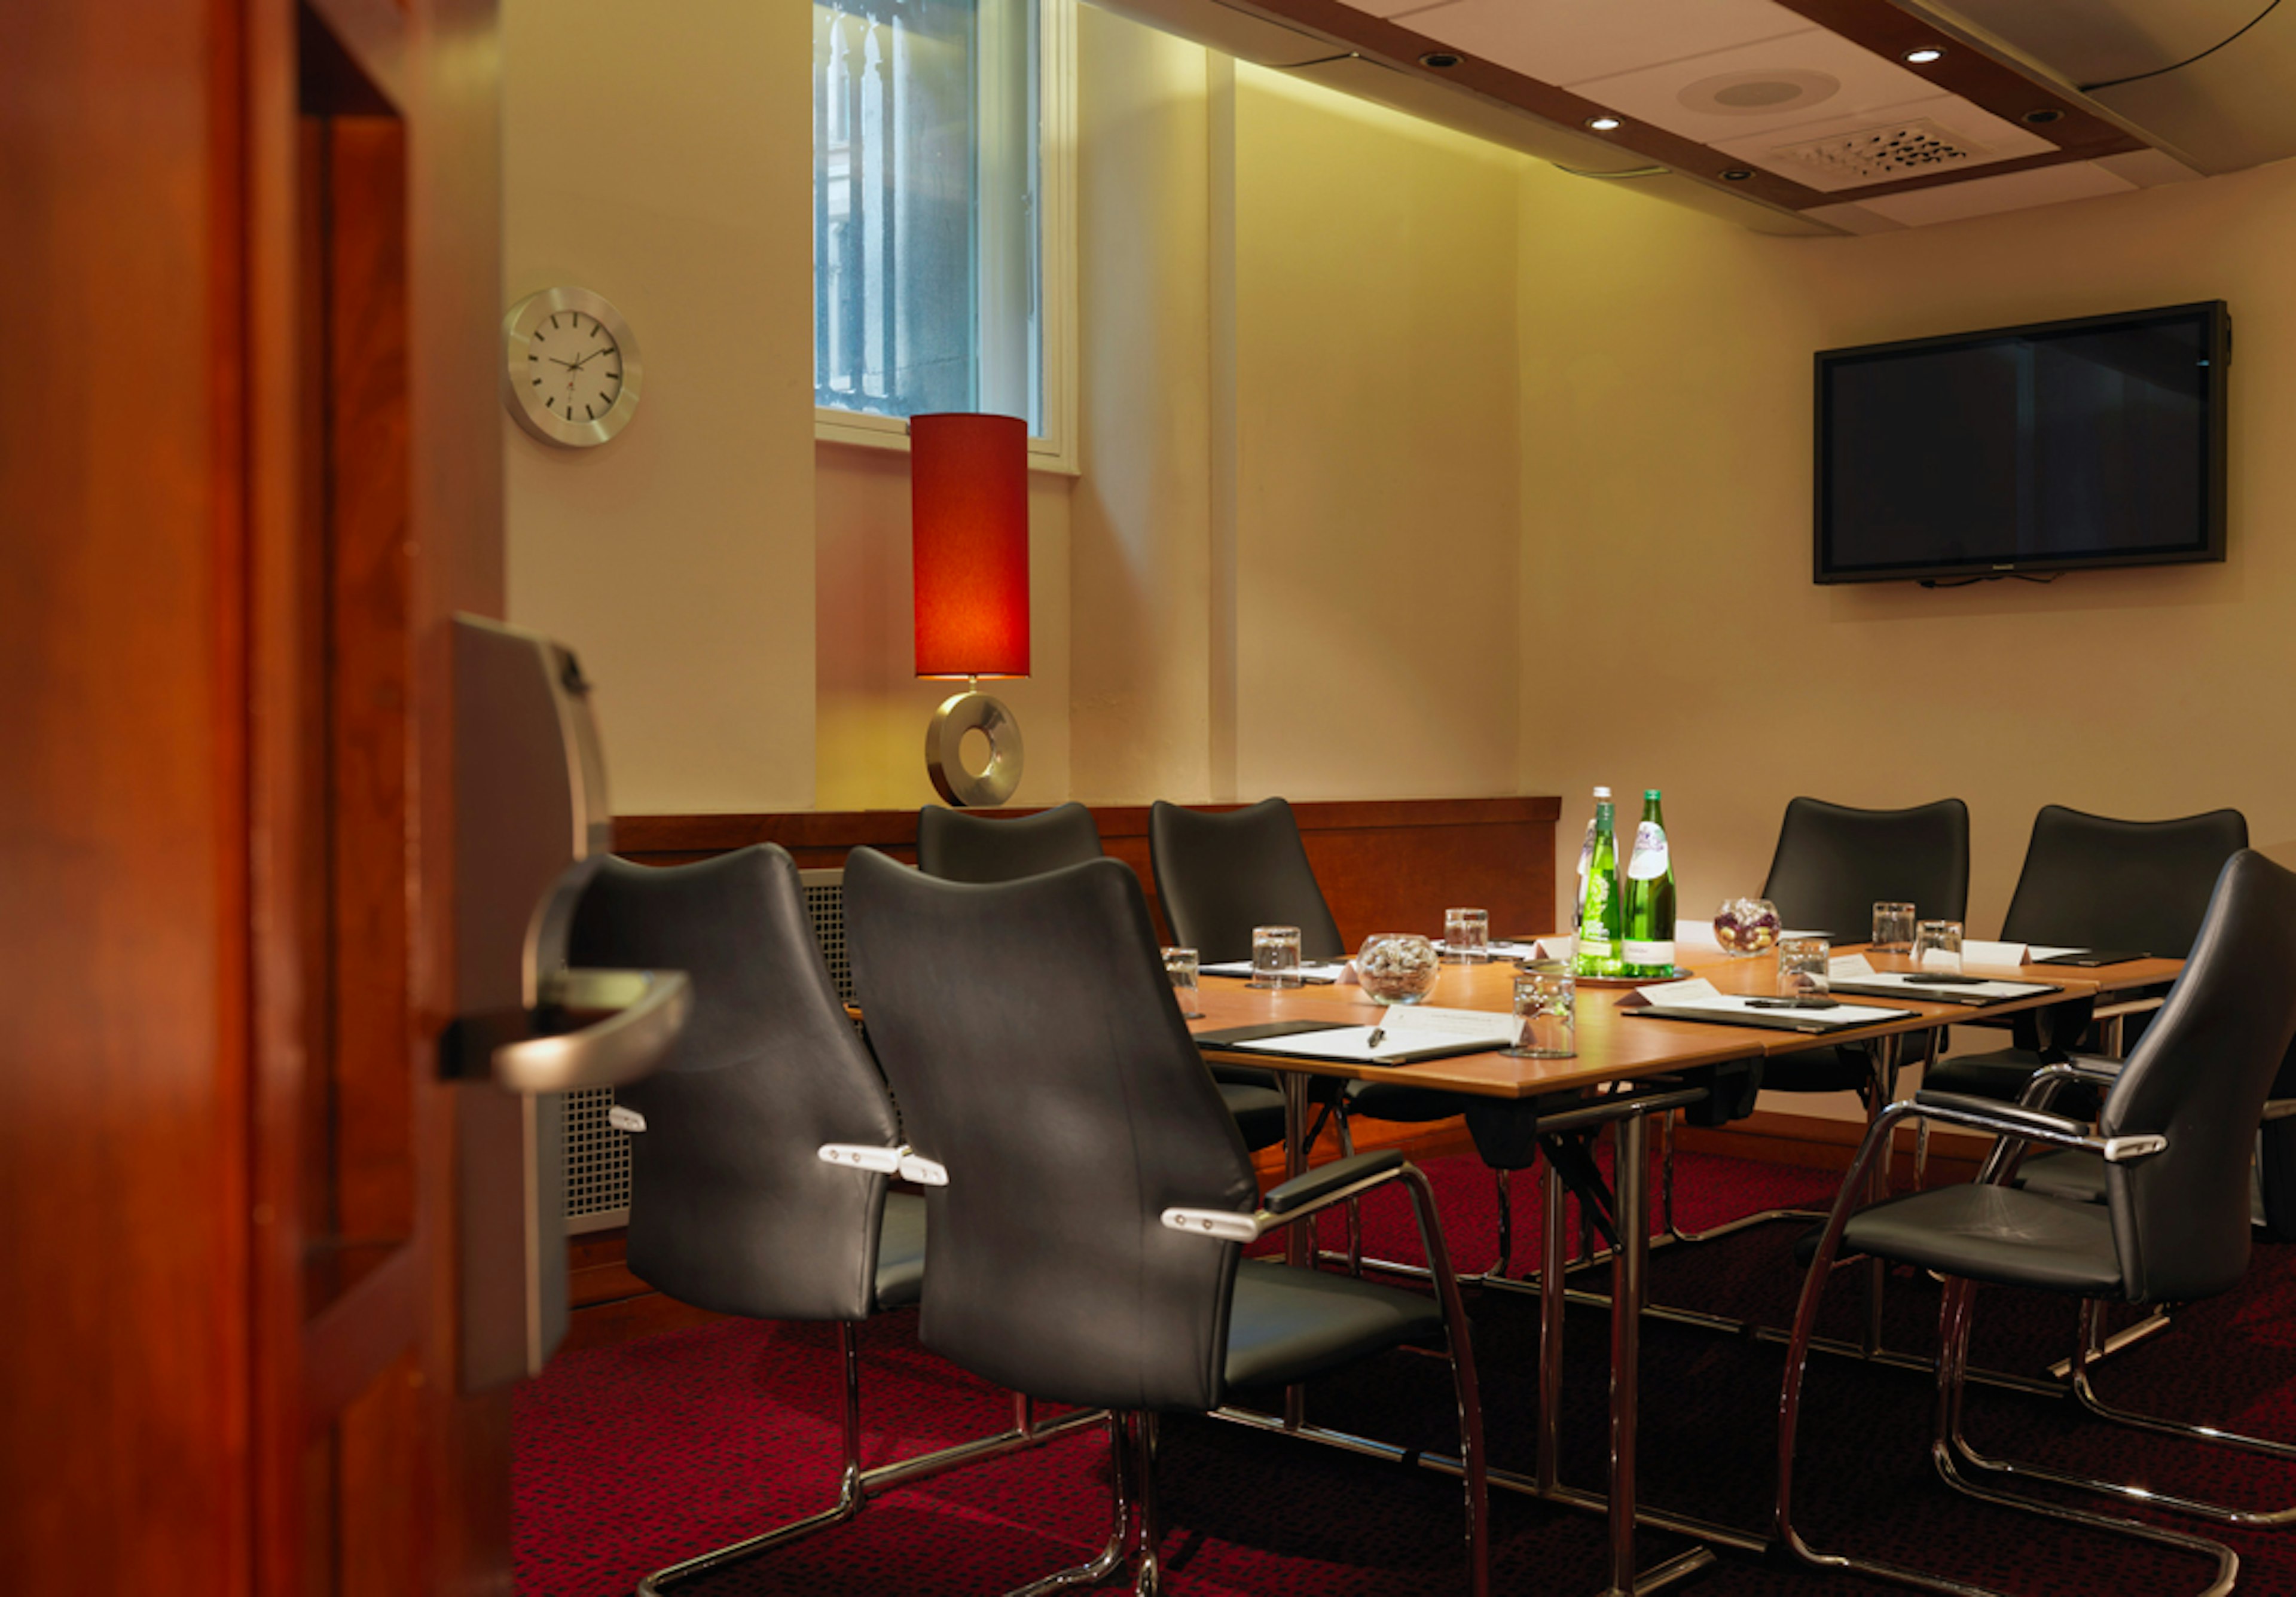 Business - Townhouse Hotel Manchester